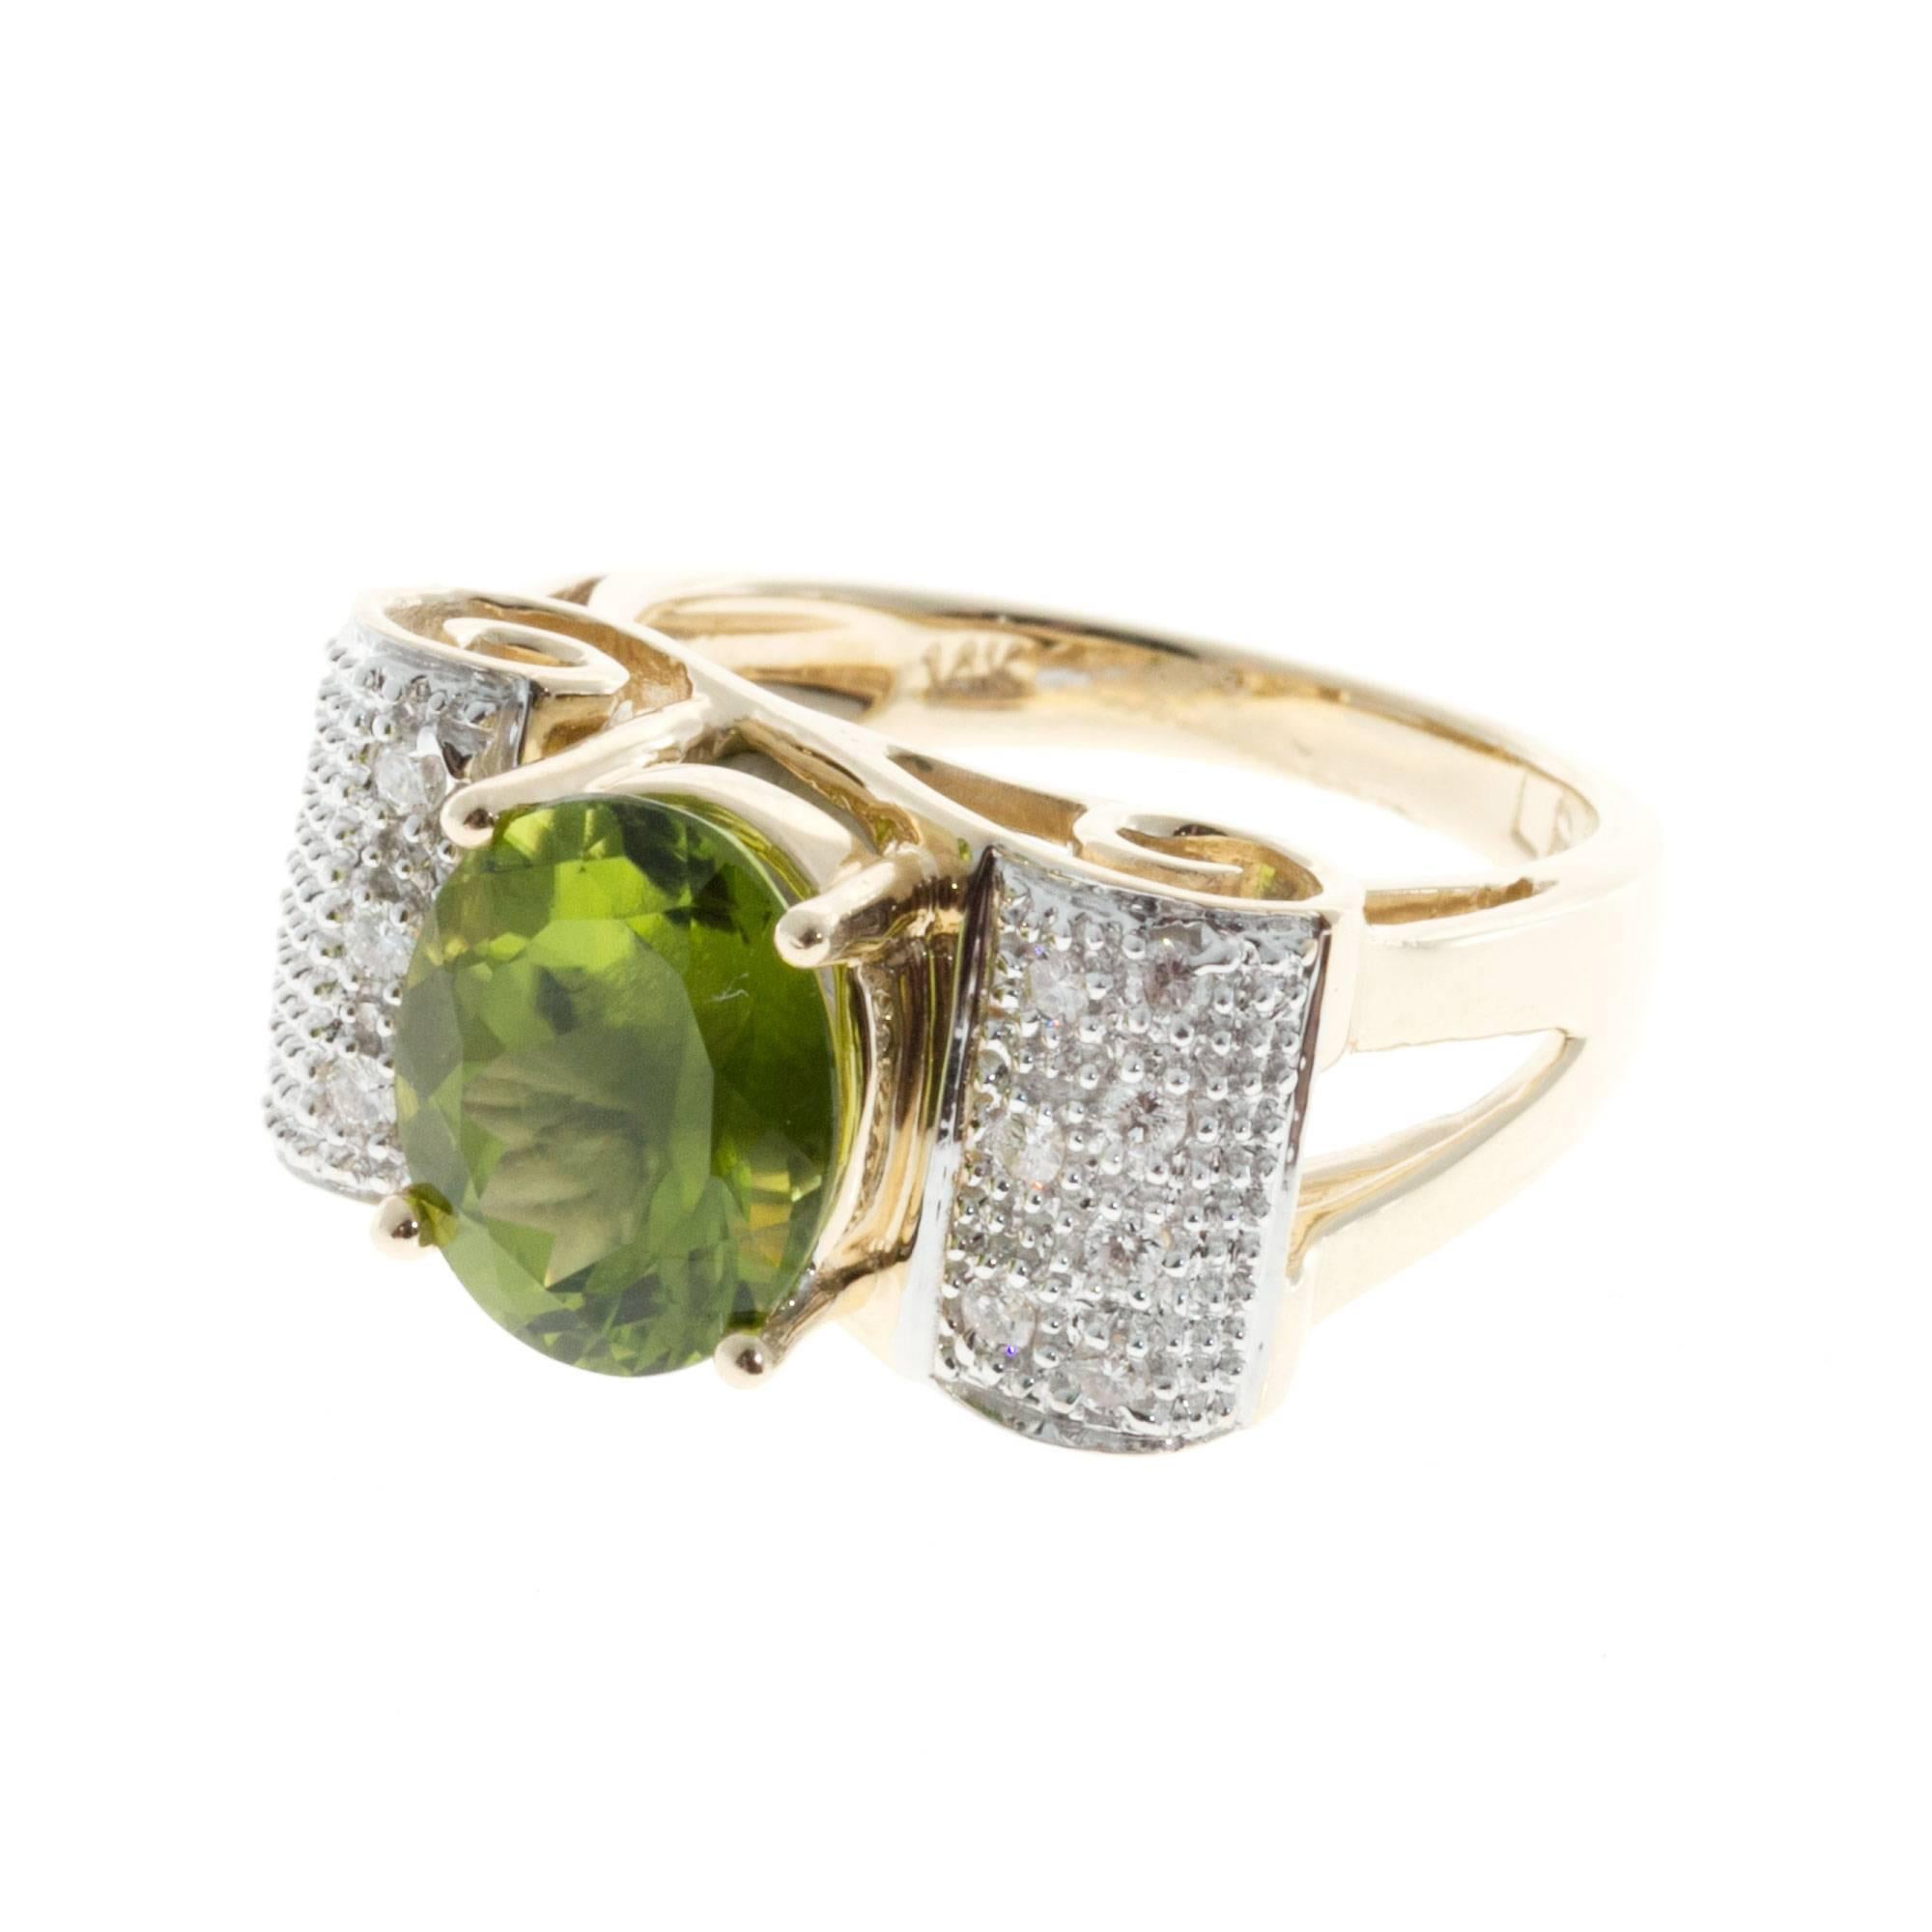 Oval Peridot Diamond Swirl Gold Ring In Good Condition For Sale In Stamford, CT